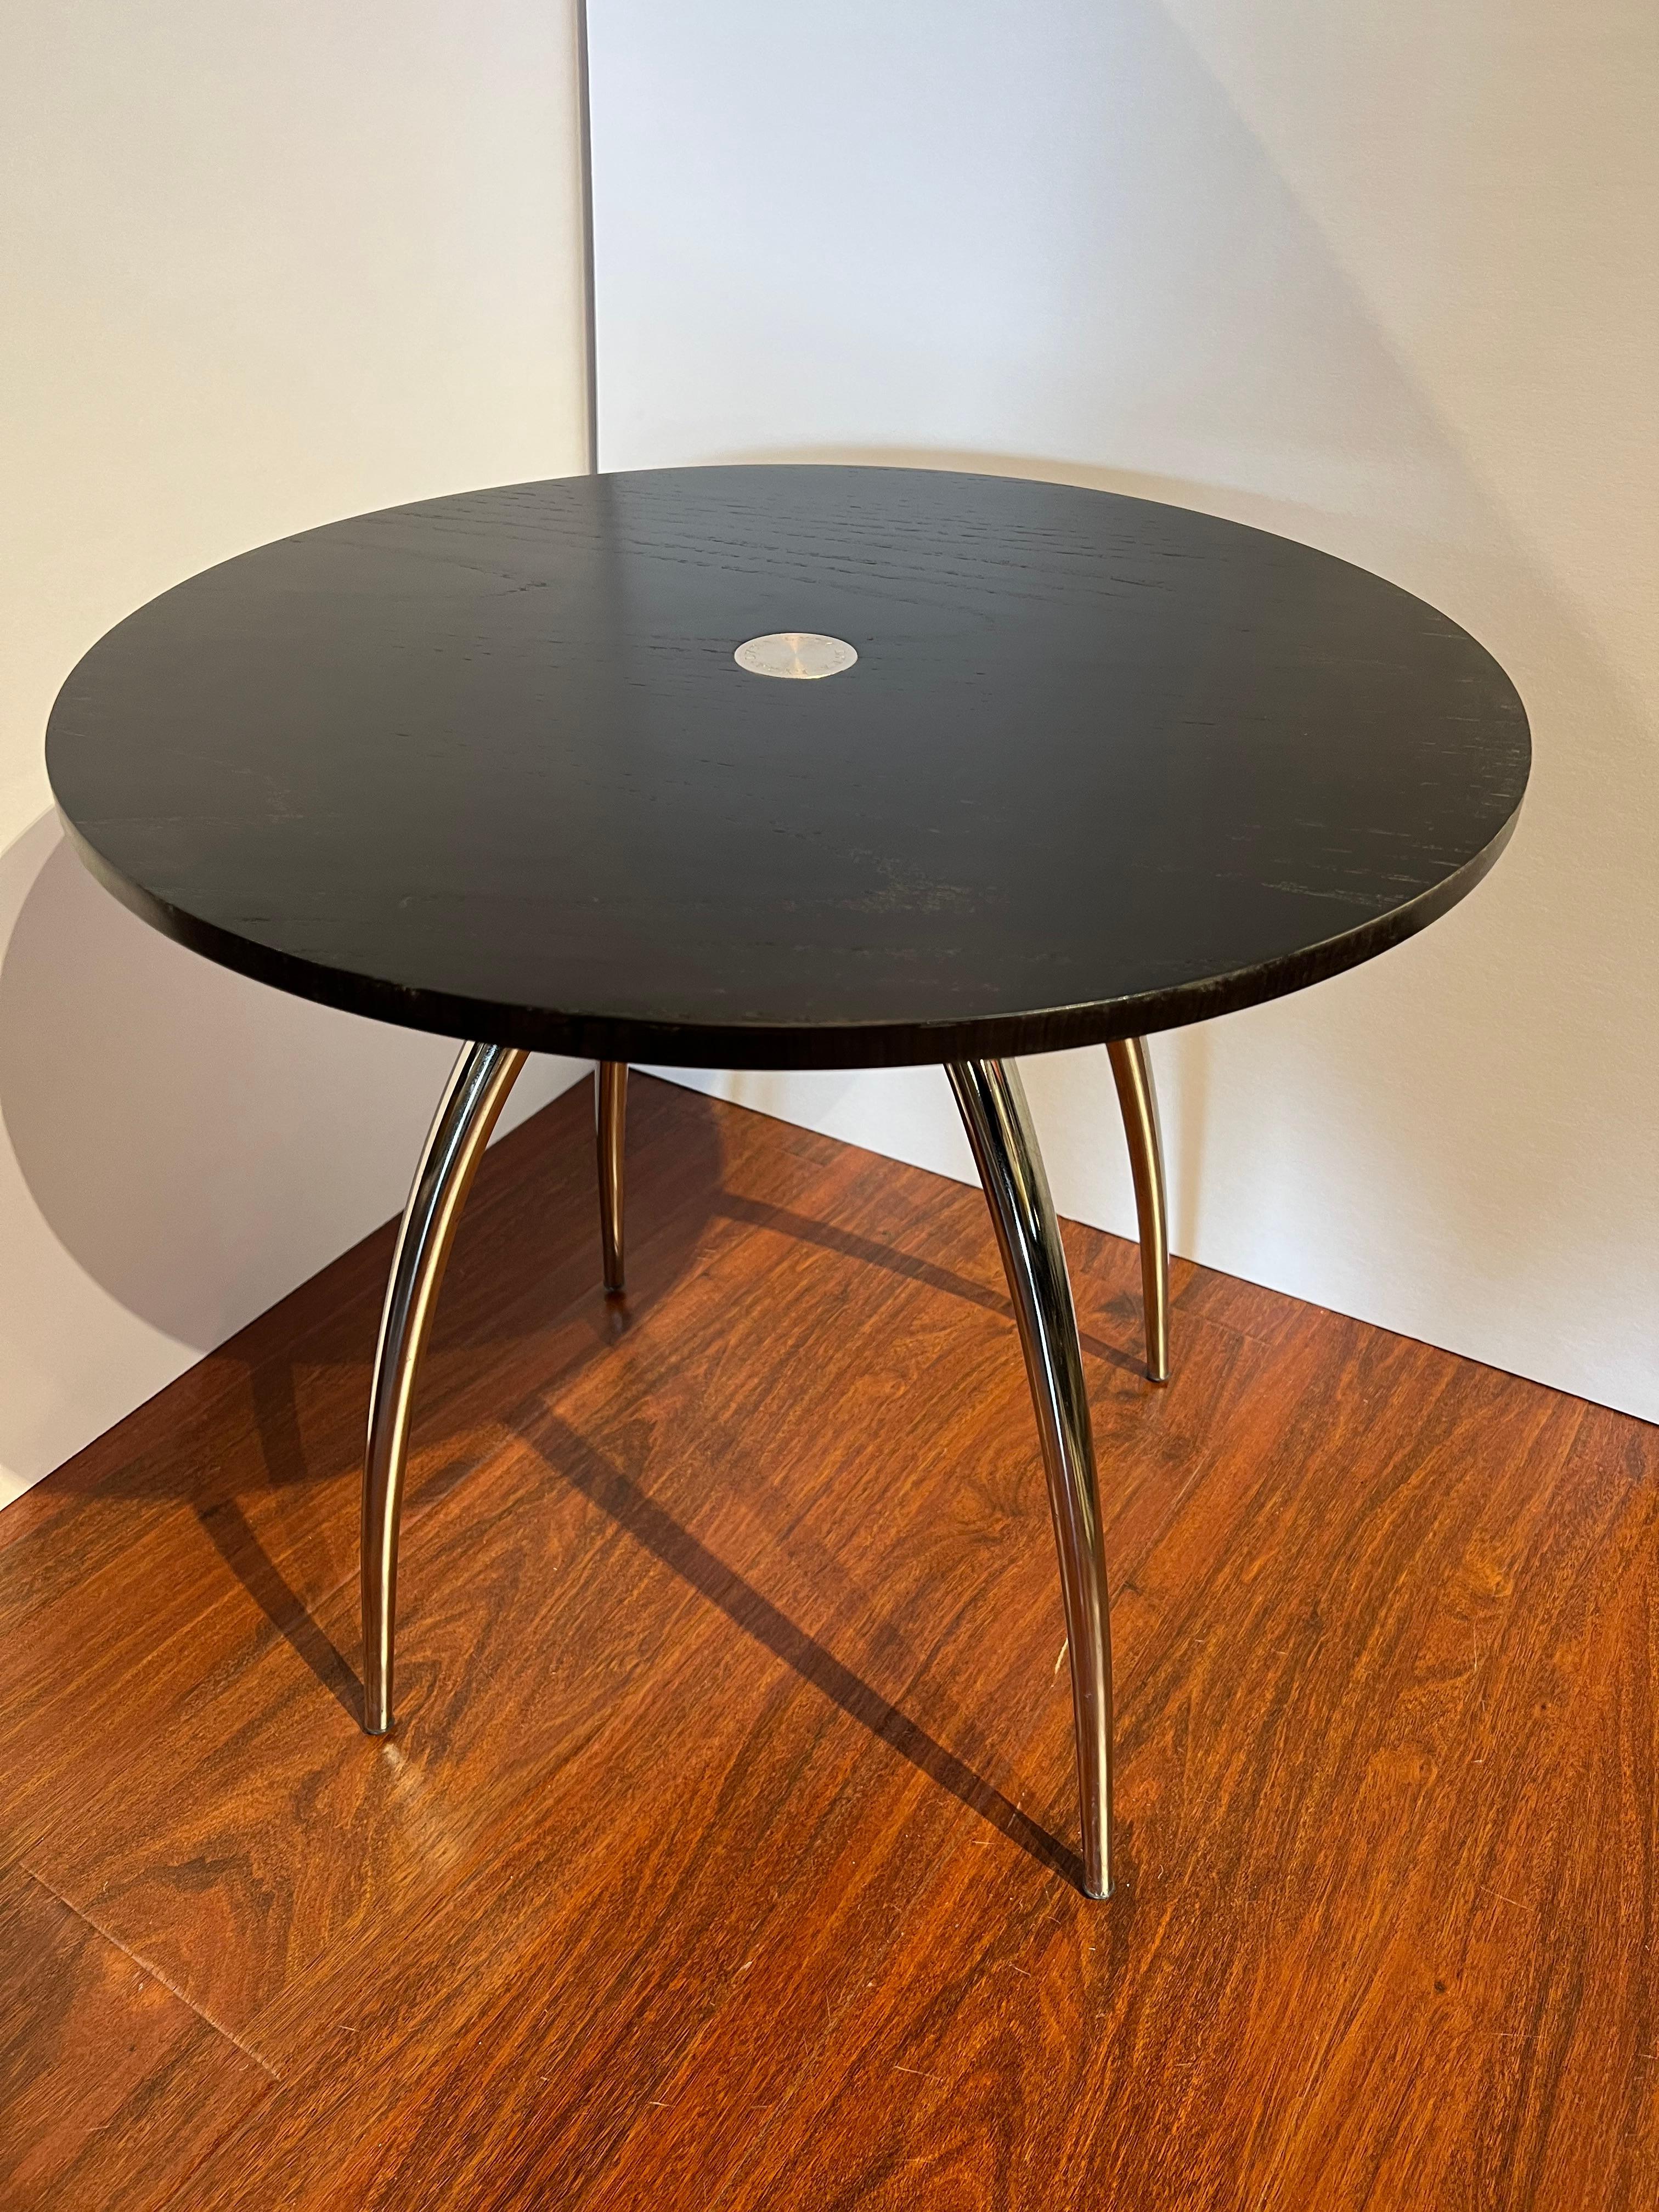 2 Magis Lyra Side Tables In Excellent Condition For Sale In Pasadena, CA